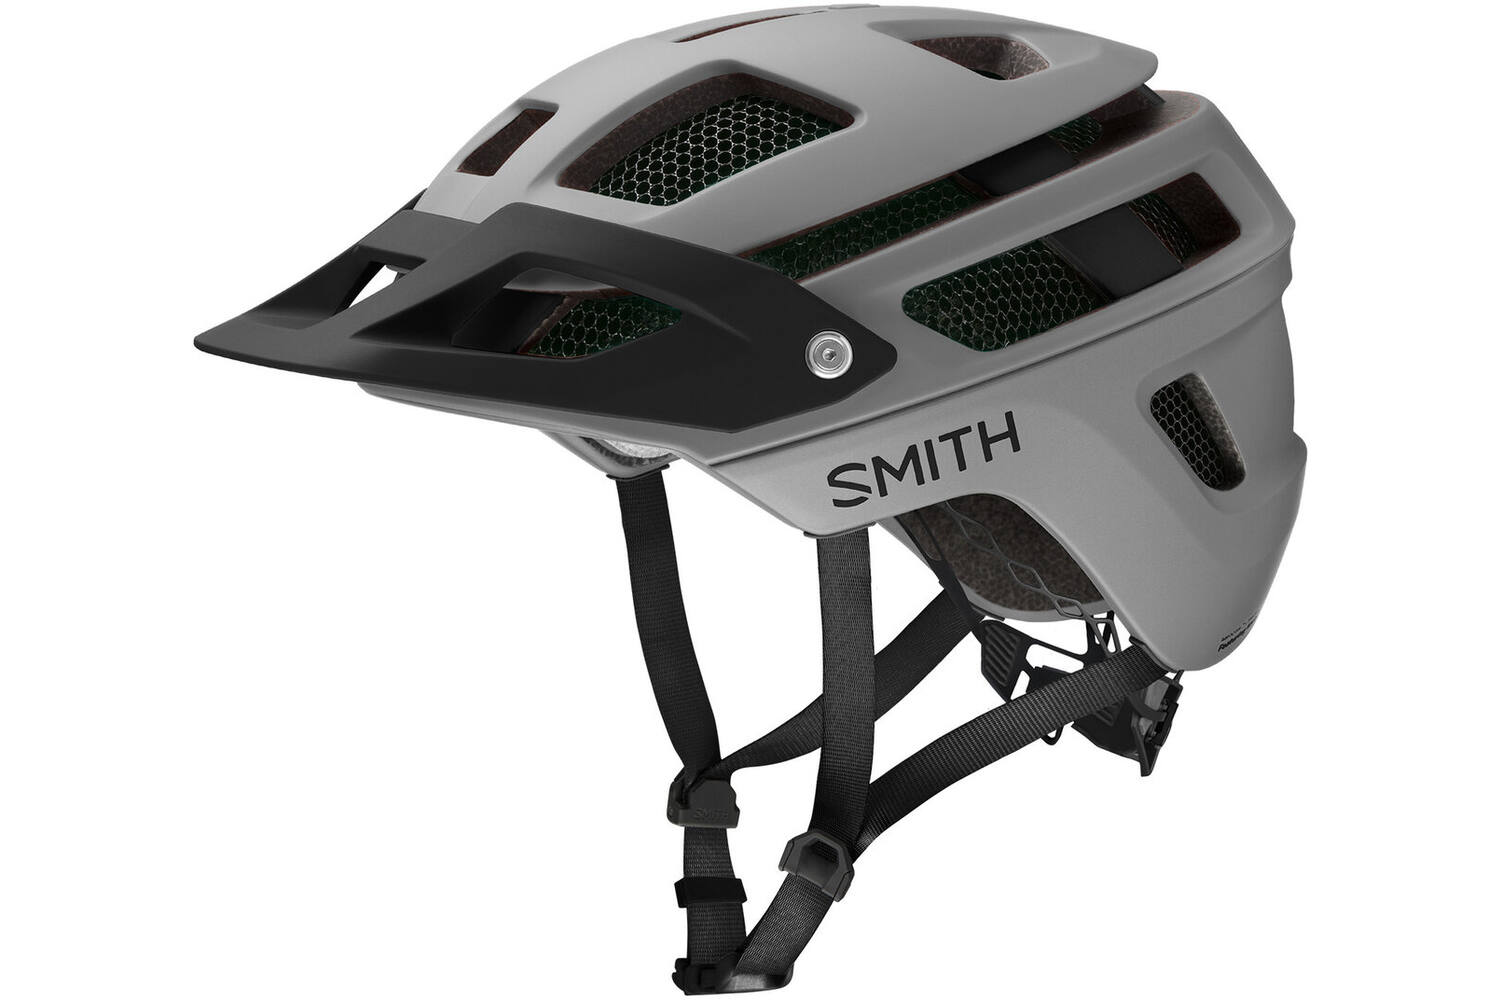 Smith - forefront 2 helm mips matte cloudgrey